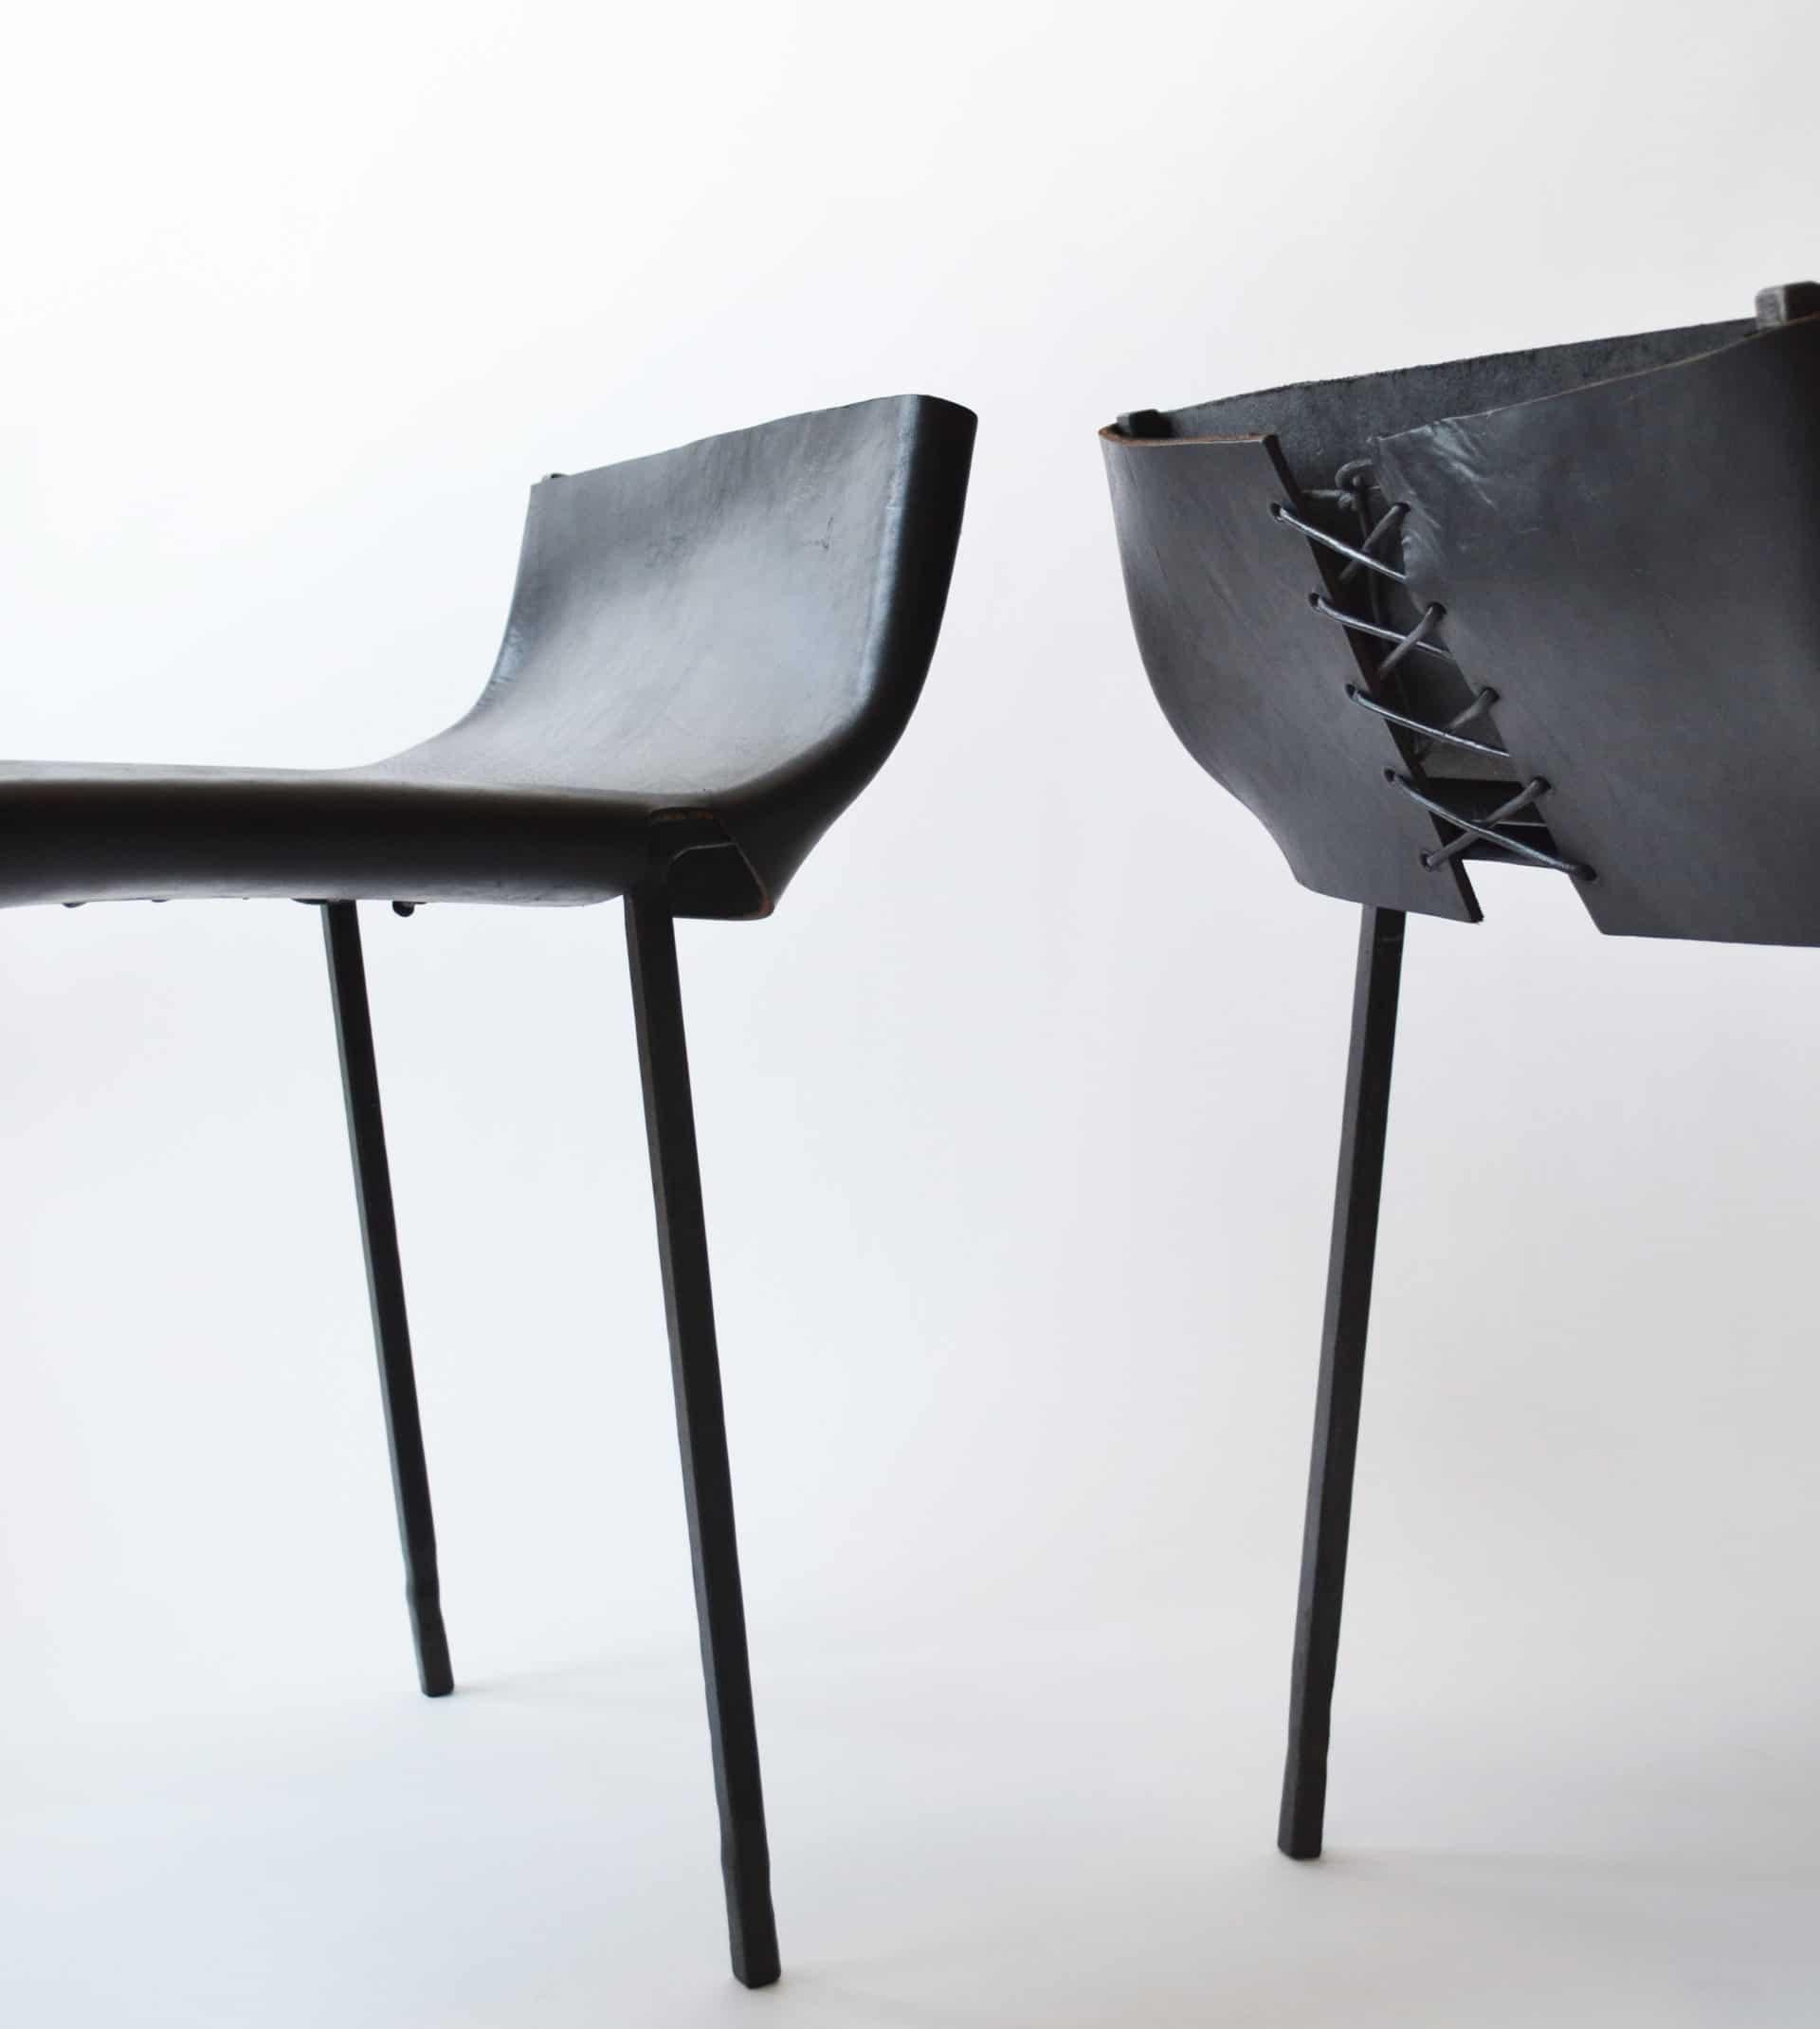 A side chair inspired by the Spanish Toreador. This special chair was designed as a functional object and a sculpture.

Blackened steel with a wax finish. Buffalo leather.

Handmade in New York.
 